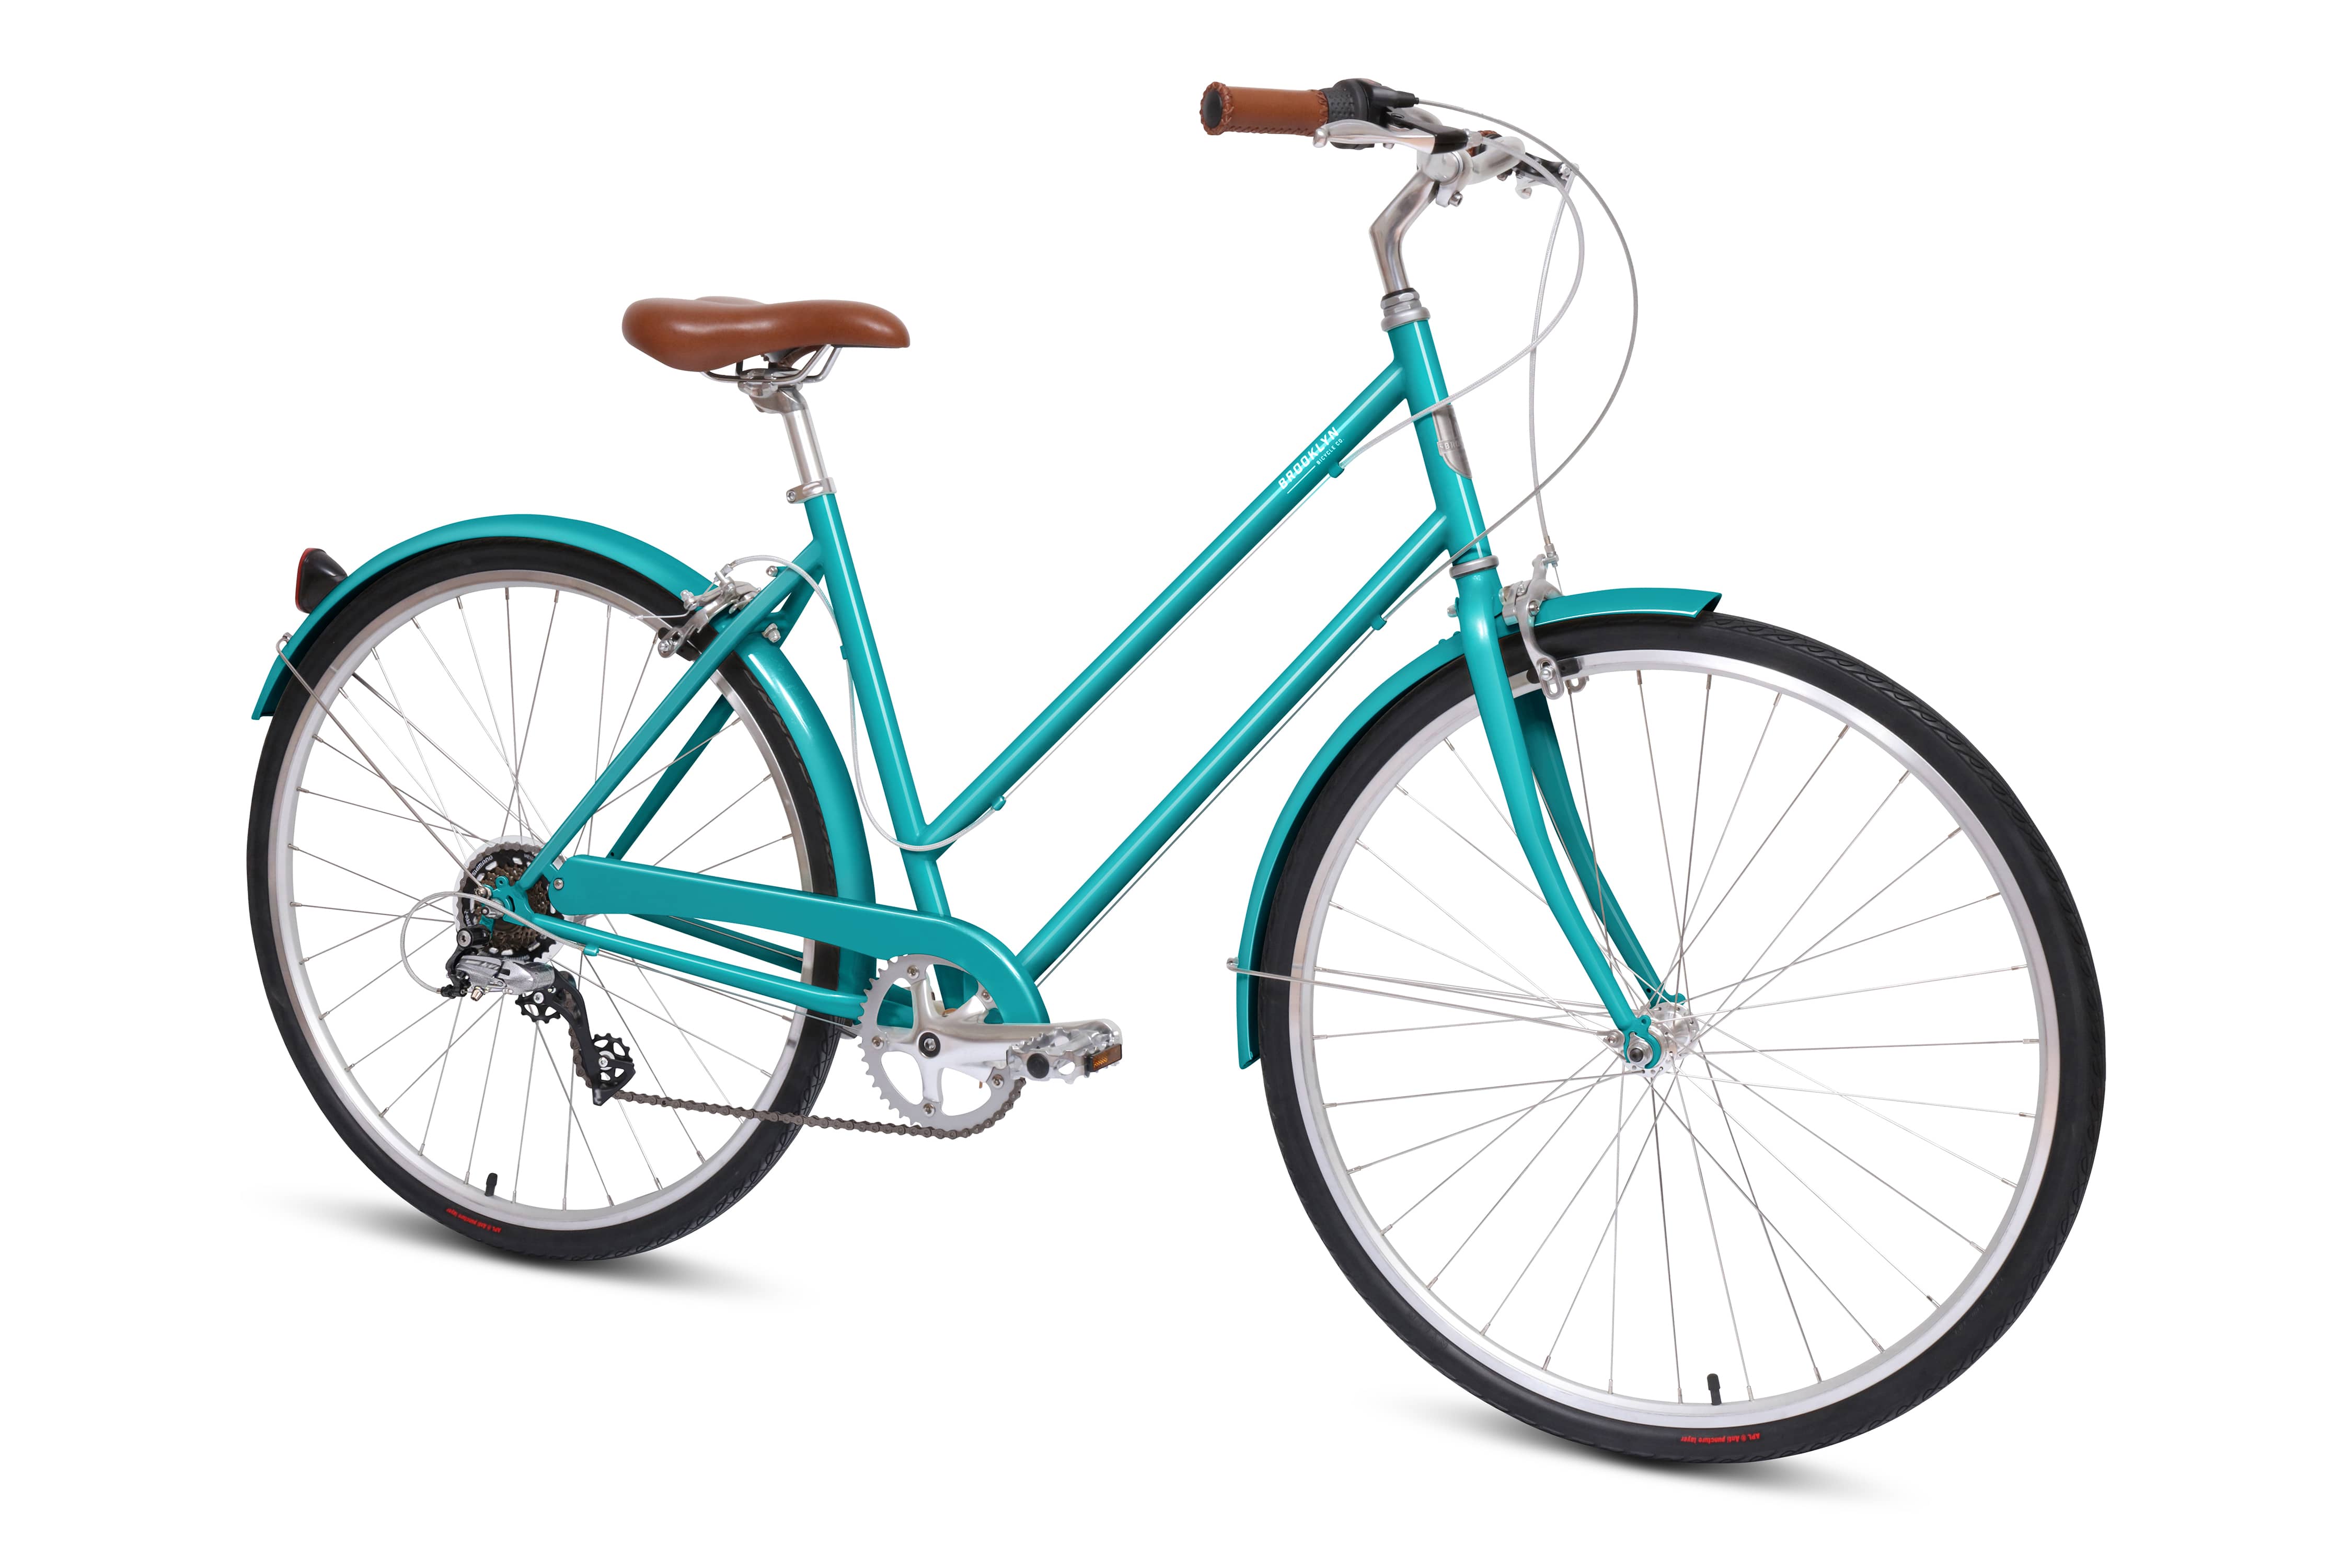 8 Speed Step Through Bicycle | Franklin Eight City Cruiser ...